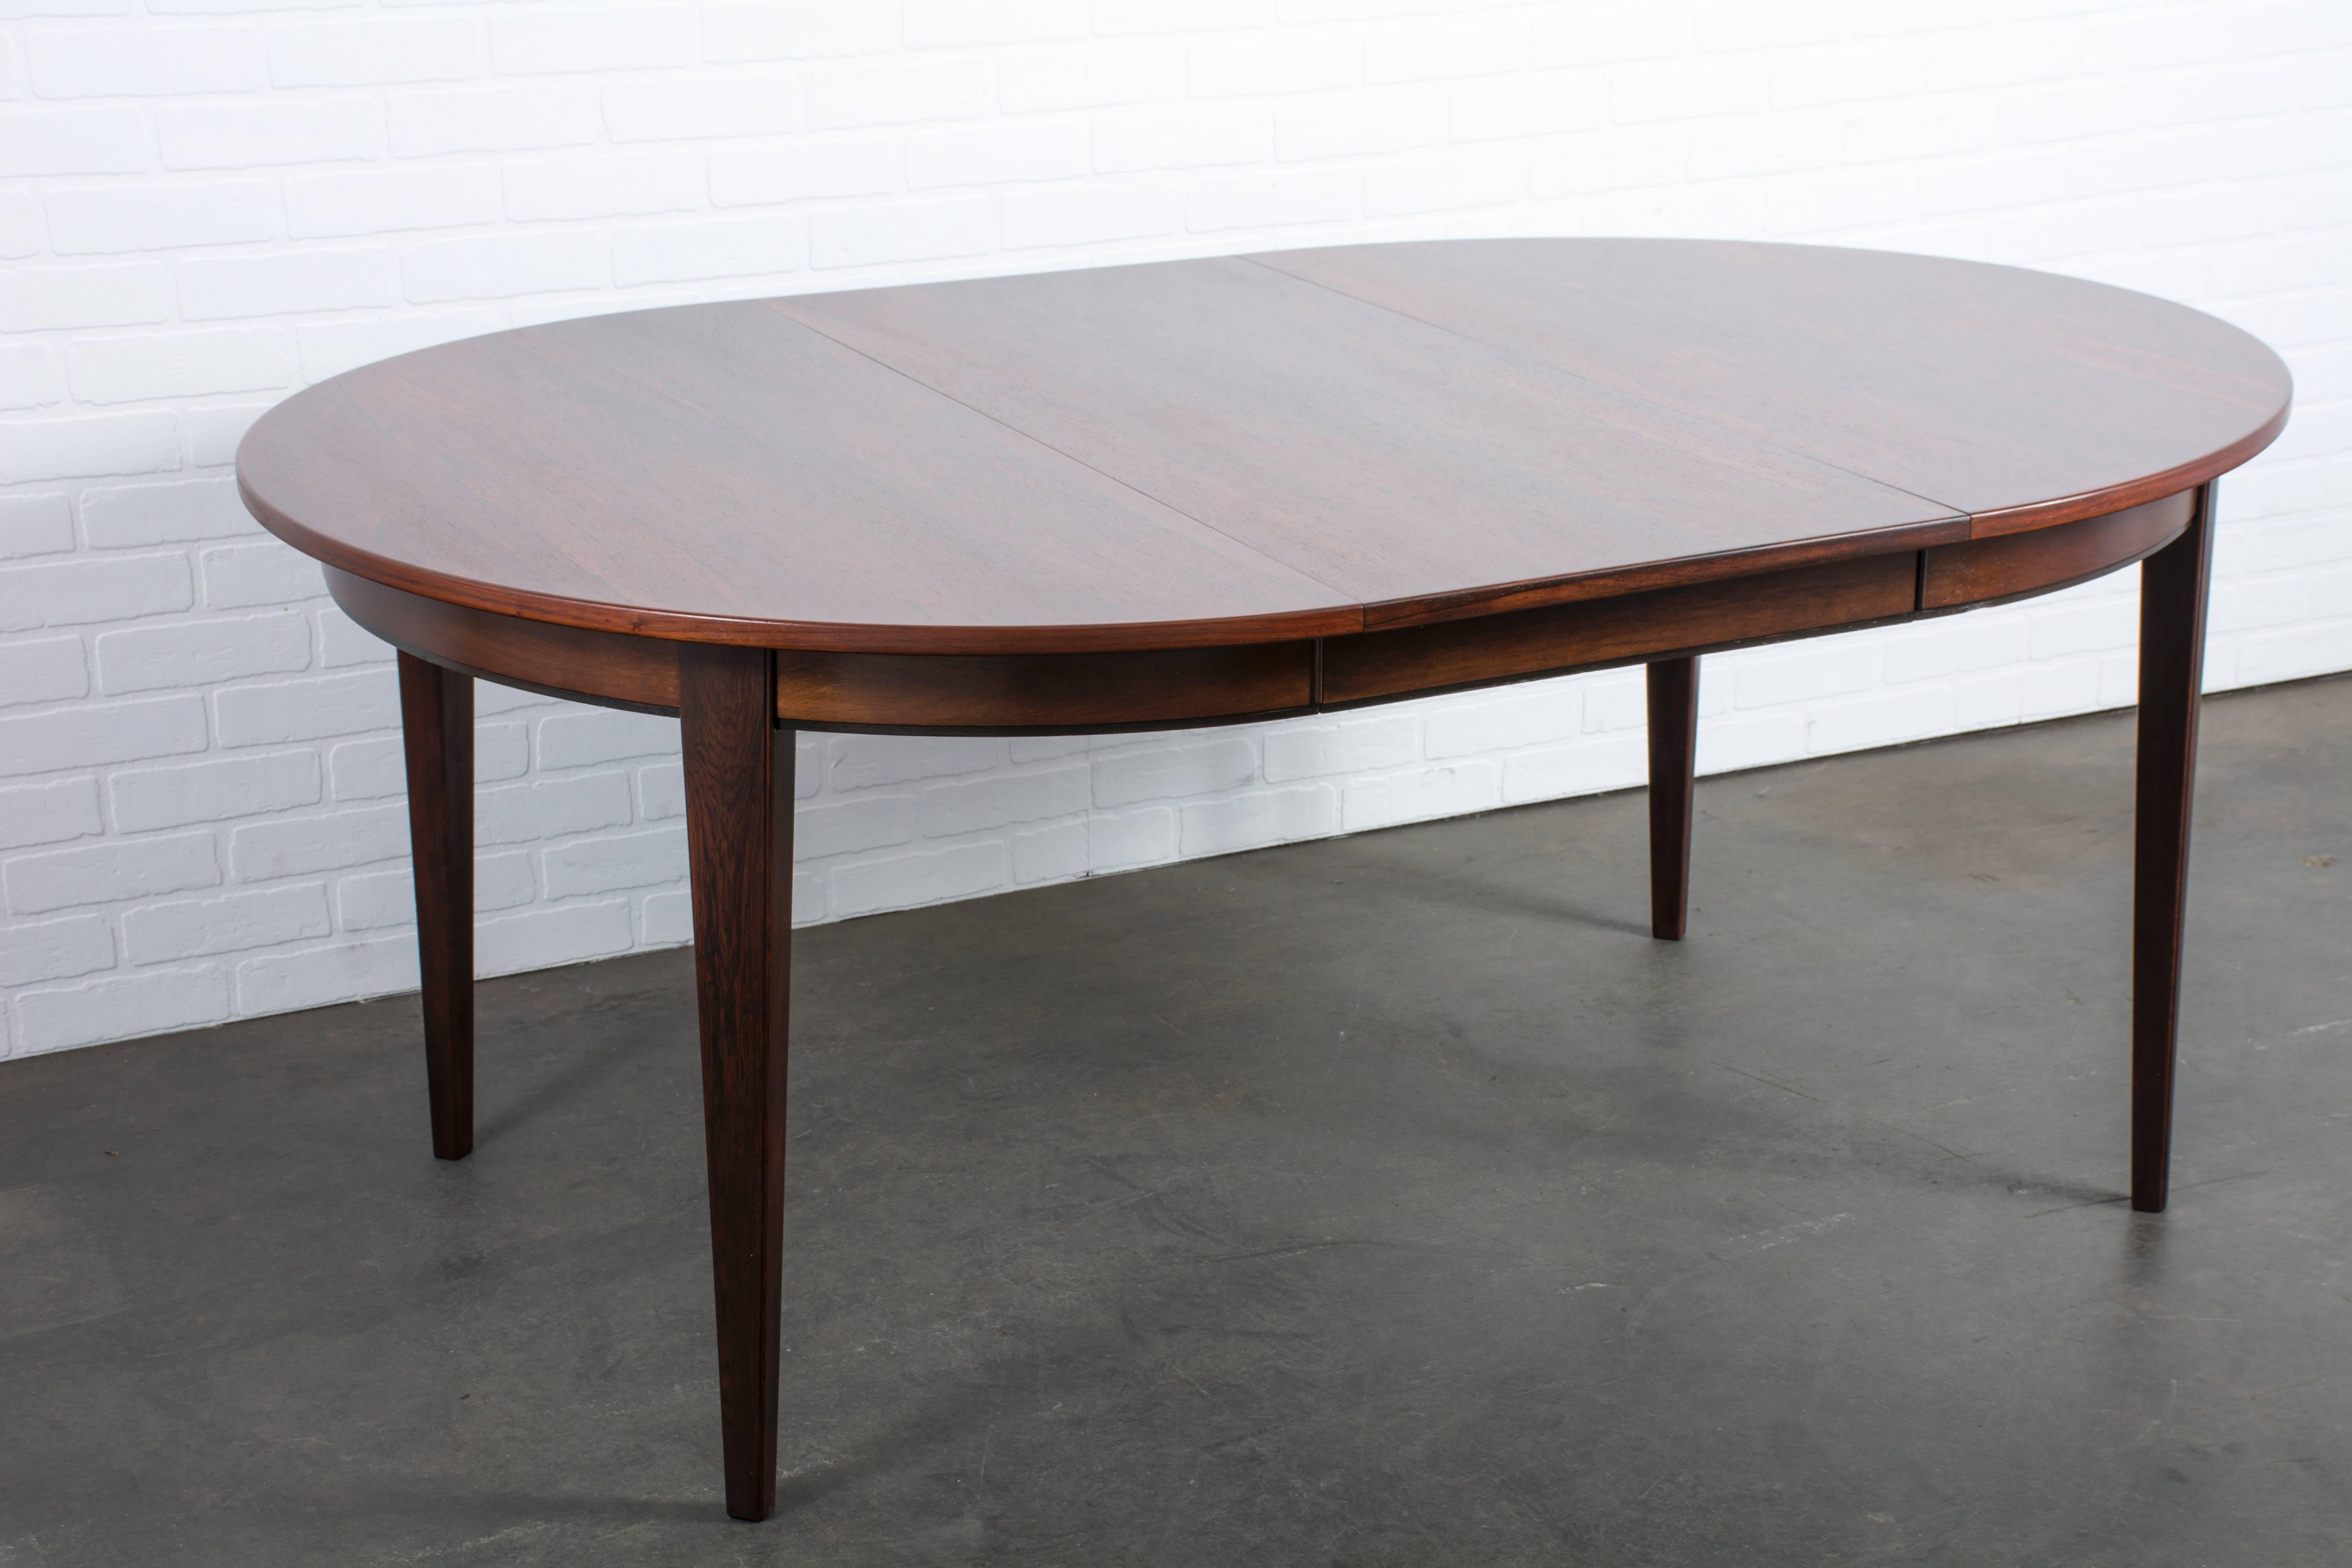 Mid-20th Century Danish Modern Dining Table with Leaves by Gunni Omann